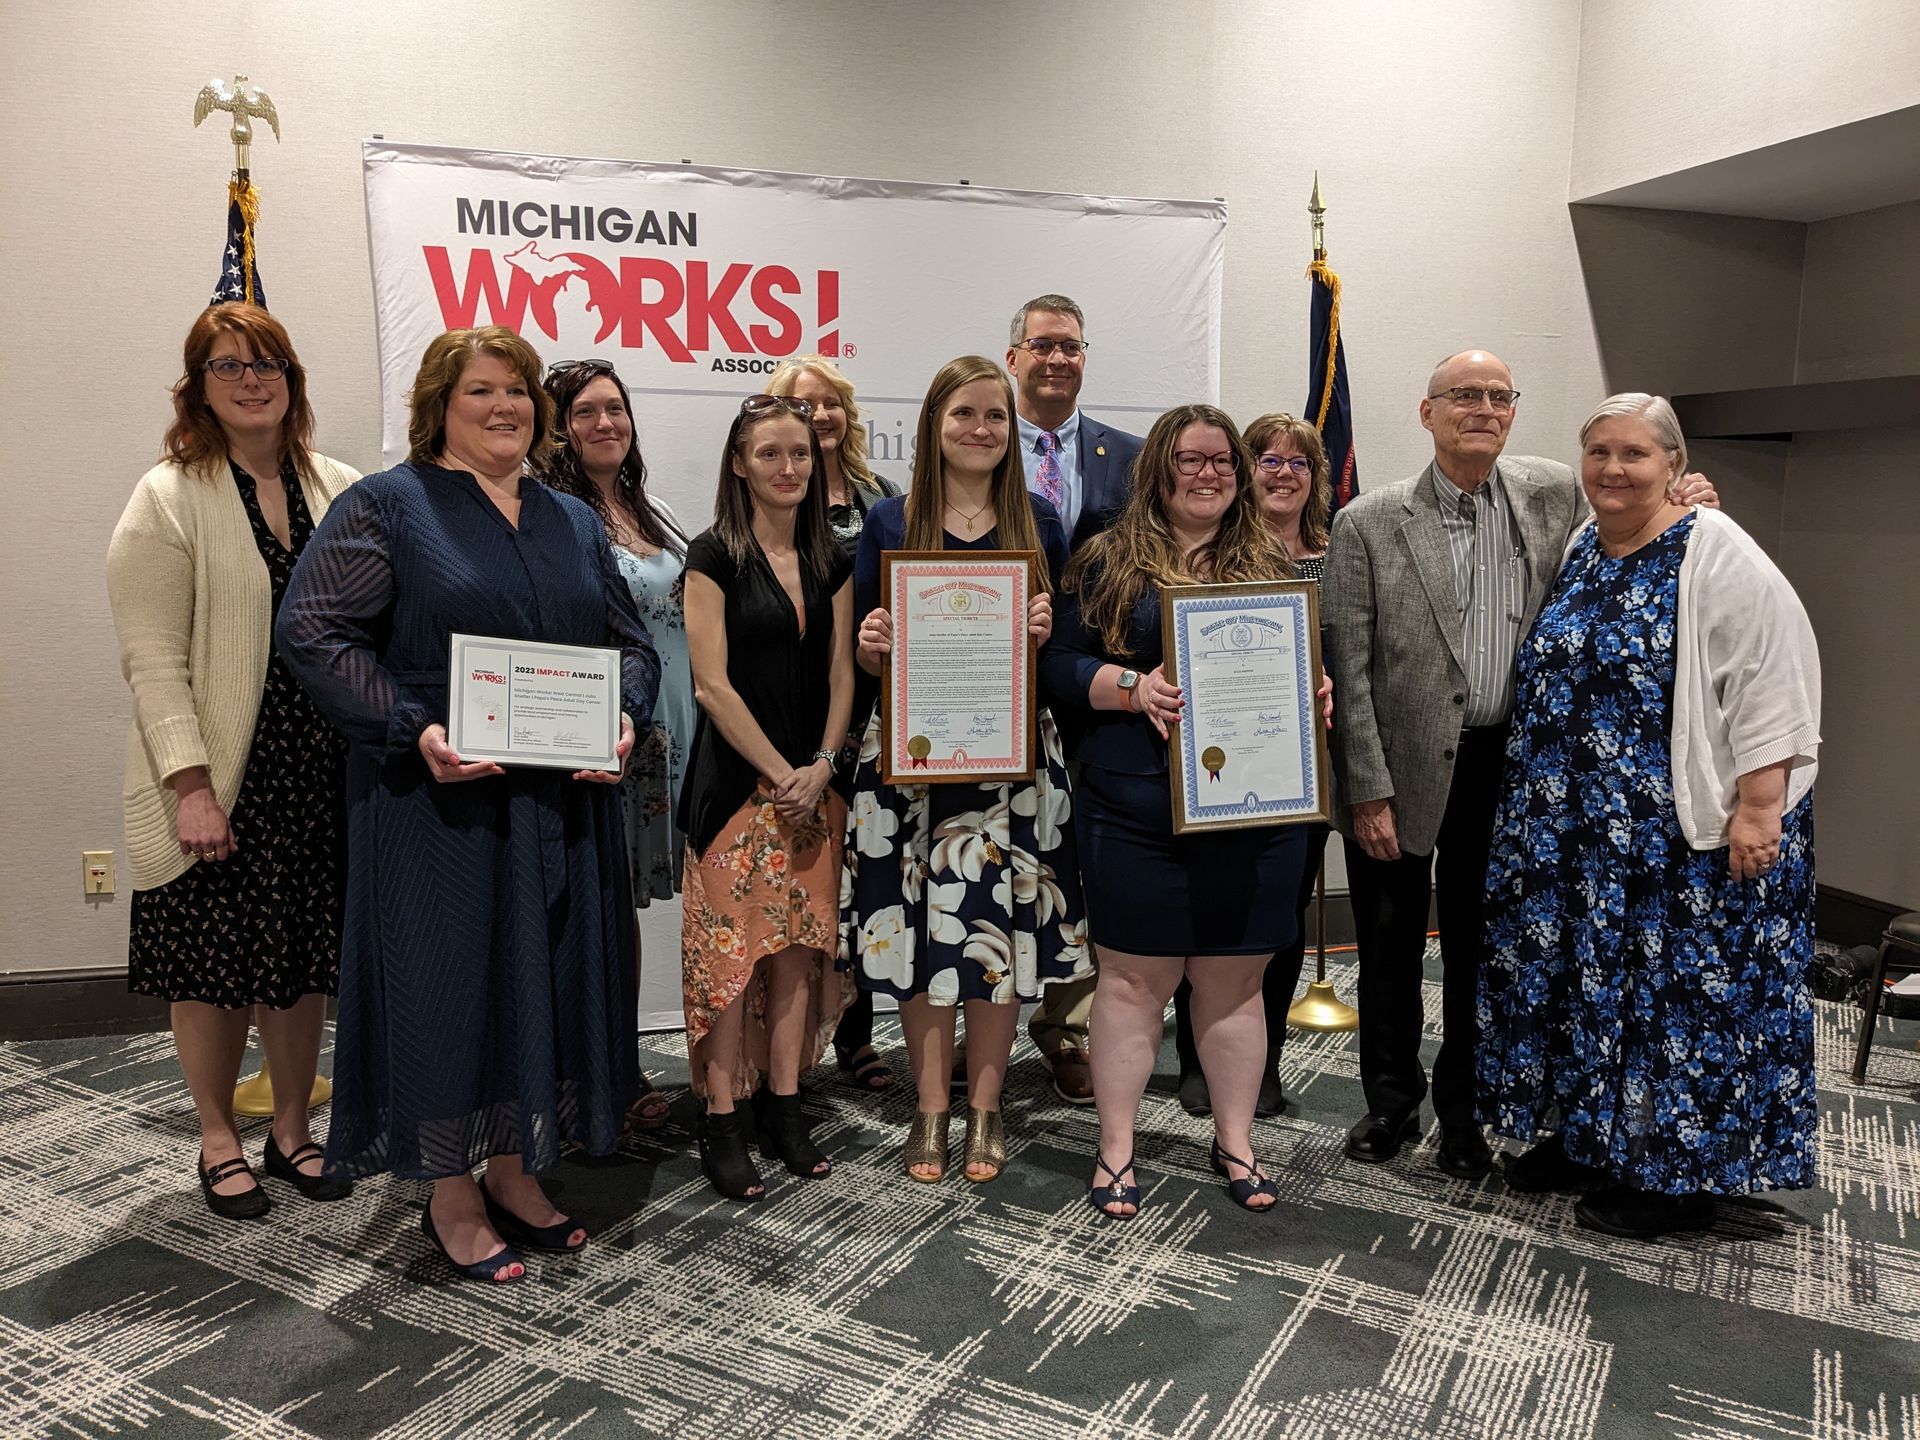 Julia Sheffer (center) recently received a 2023 Impact Award from Michigan Works! West Central for earning her CNA training. She is pictured with members of the Michigan Works! West Central staff, coworkers, her parents and more.